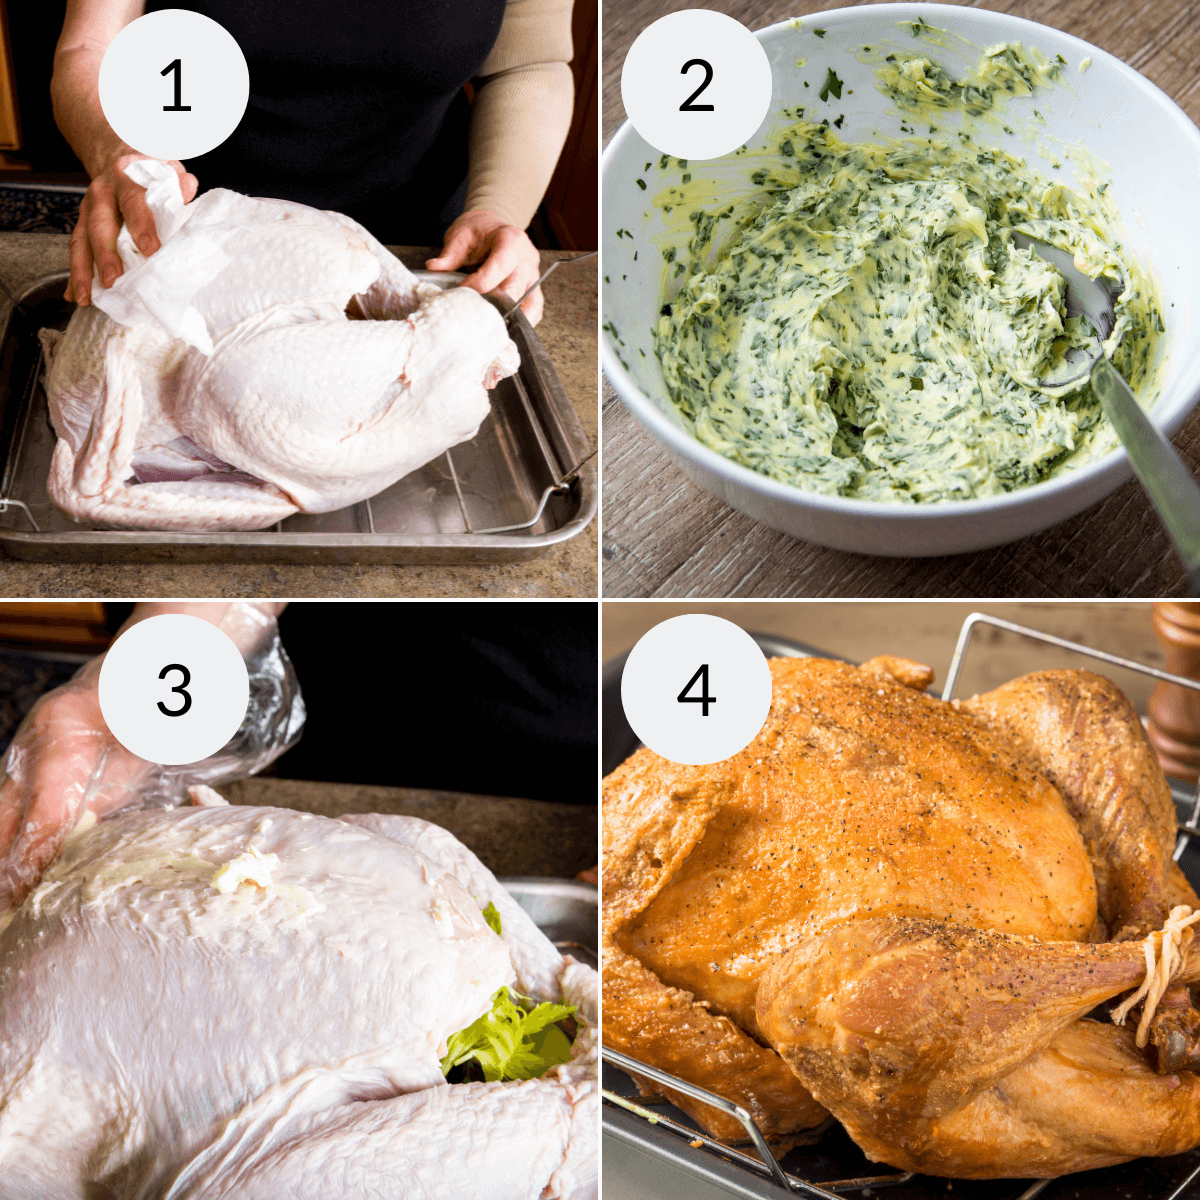 Step by step instructions for making a convection oven turkey.